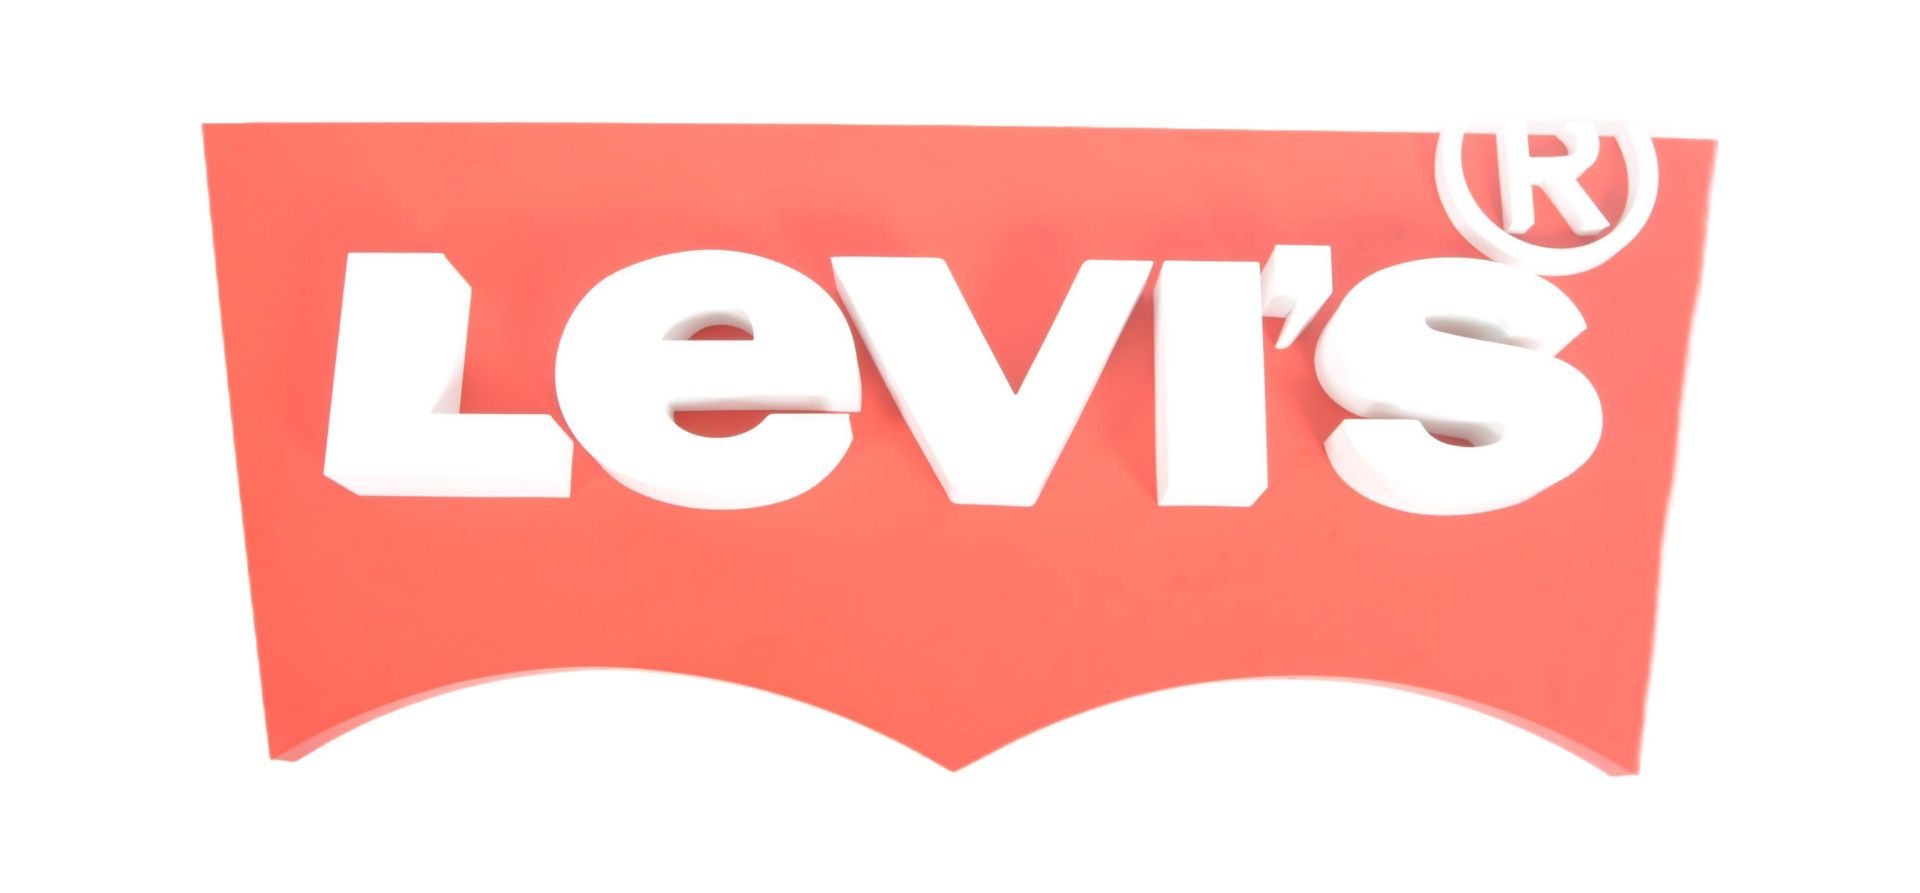 LEVI'S - A LARGE CONTEMPORARY SHOP DISPLAY SIGN